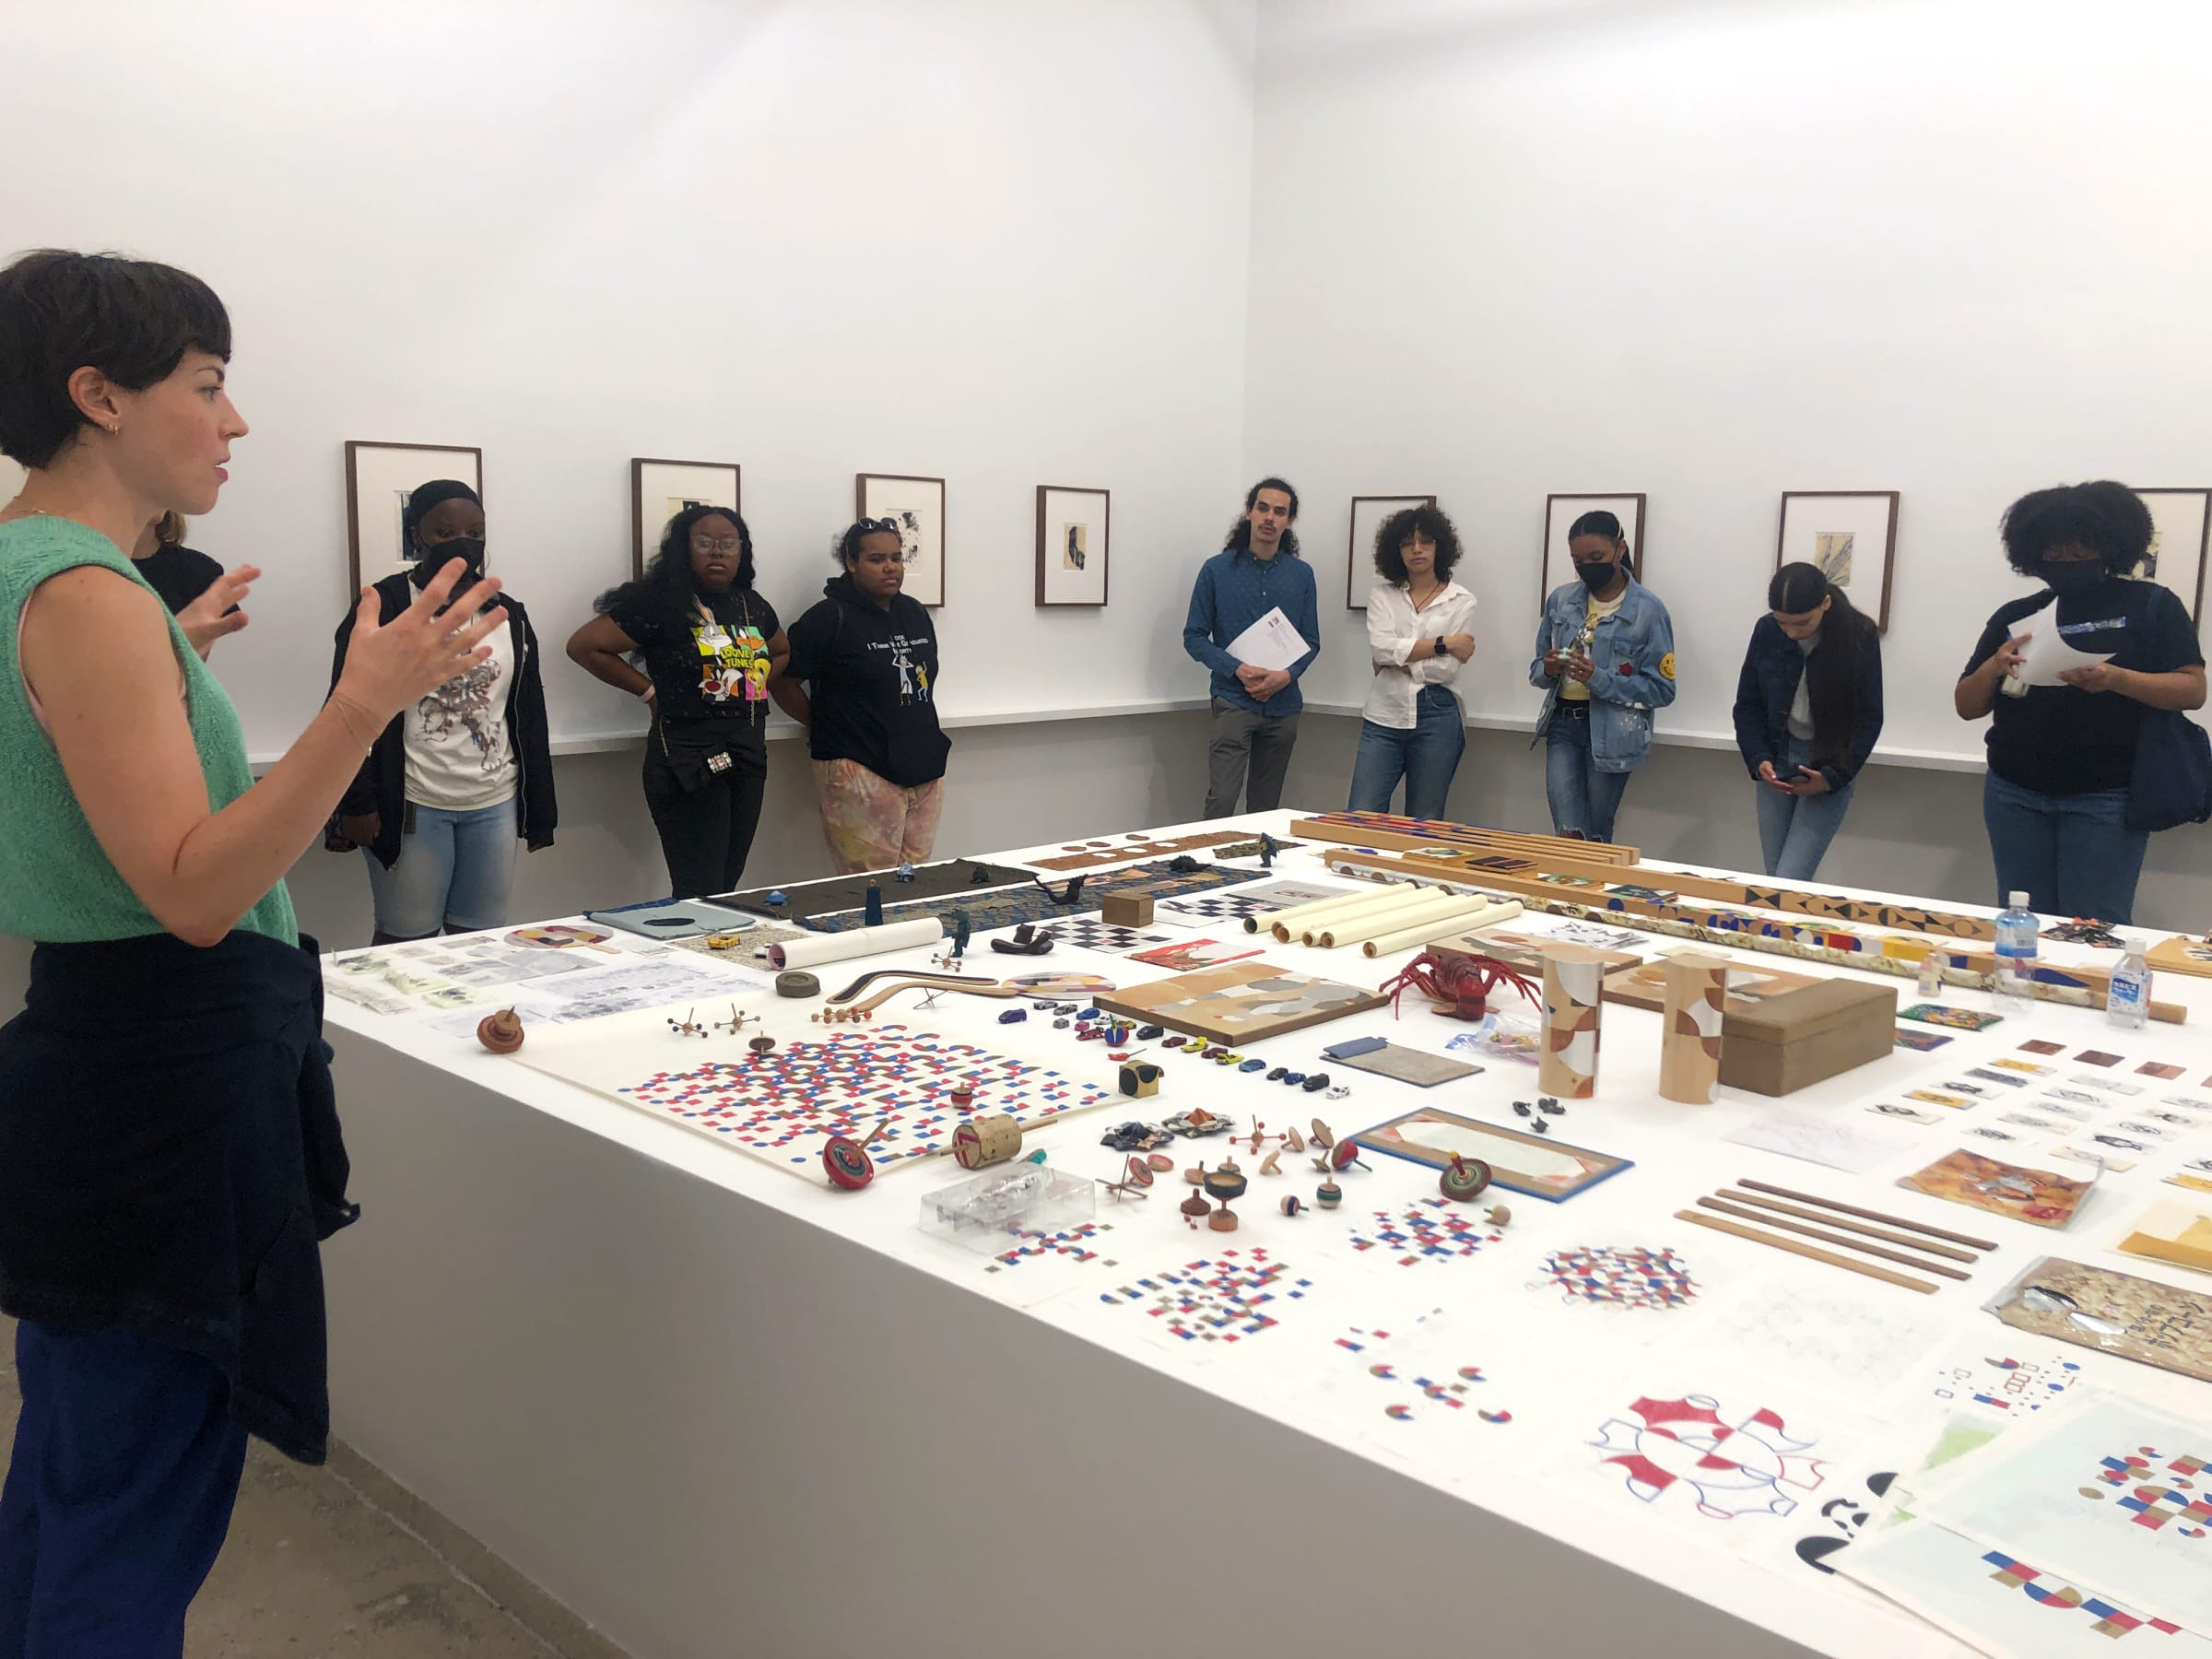 A group of students visit an exhibition by Gabriel Orozco and stand around assorted objects on a large table